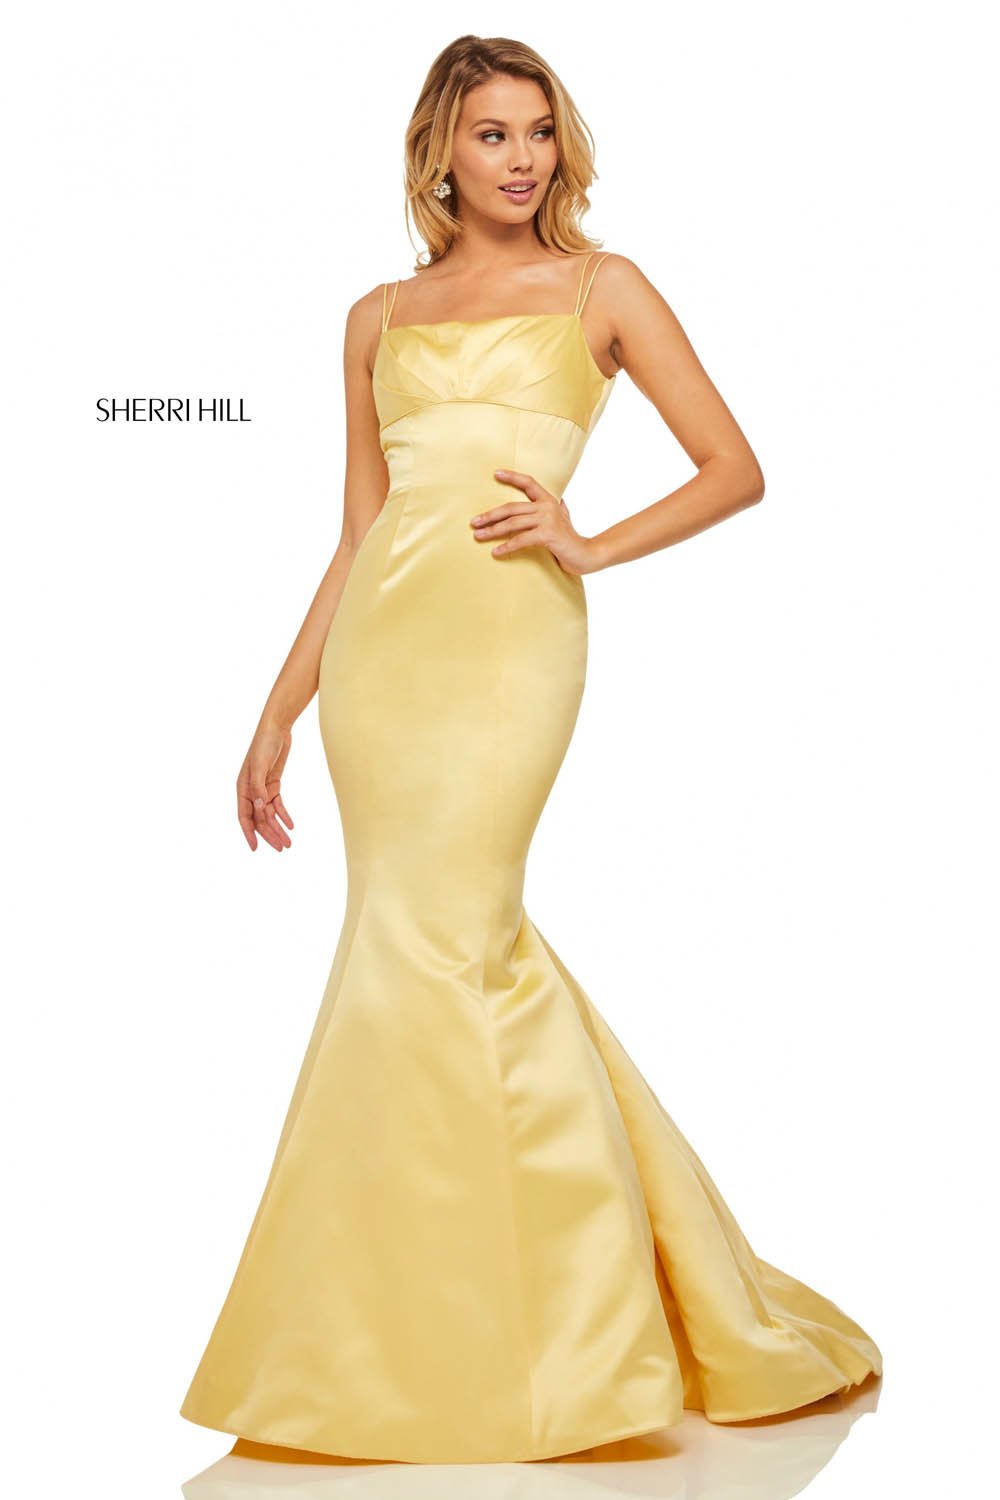 Sherri Hill 52721 dress images in these colors: Yellow, Red, Ivory, Emerald, Fuchsia.